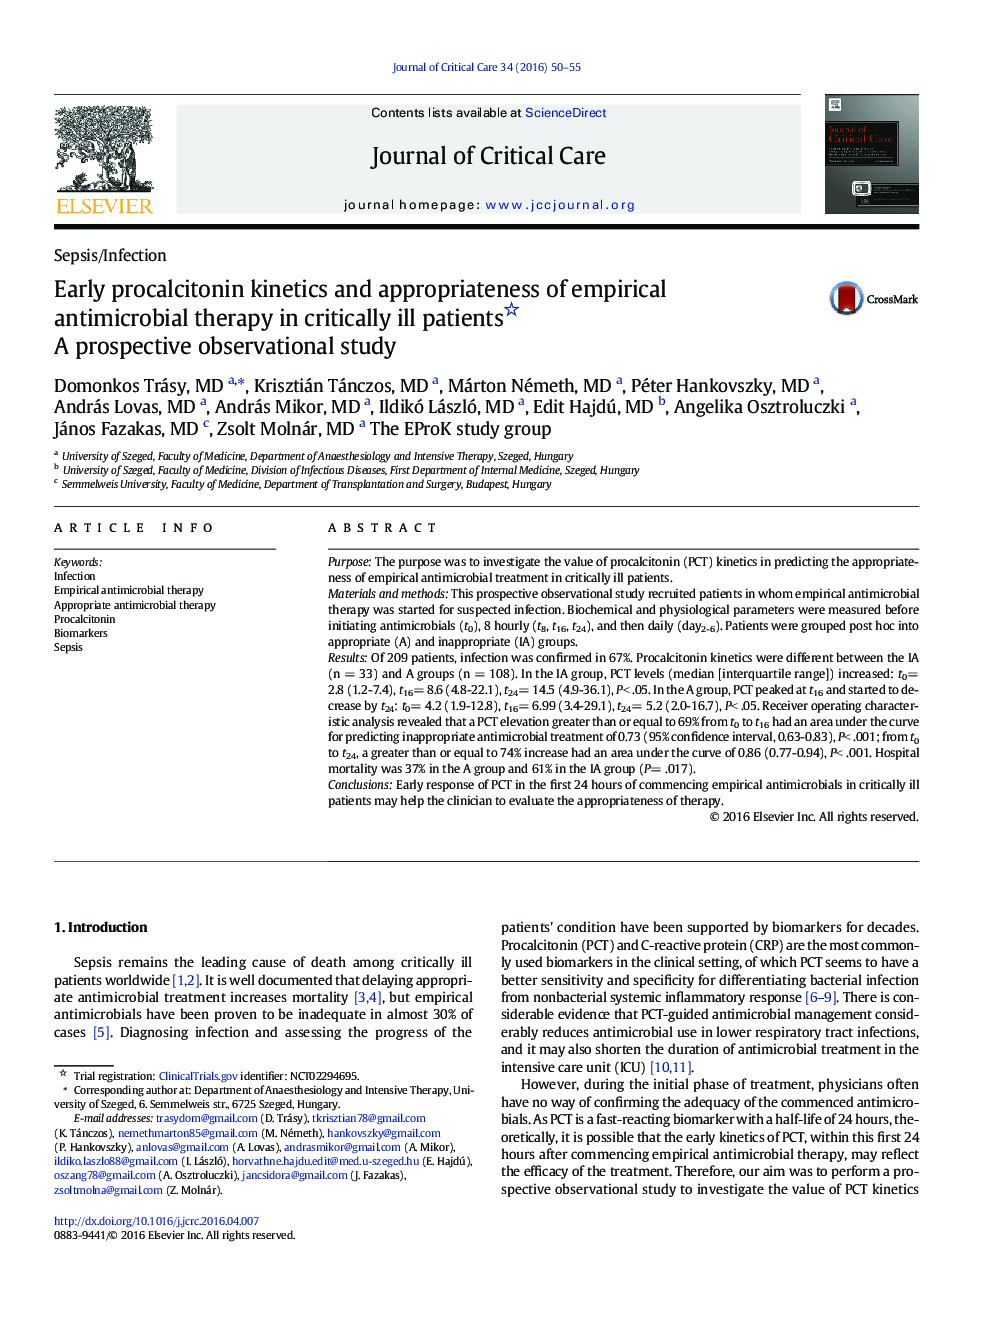 Early procalcitonin kinetics and appropriateness of empirical antimicrobial therapy in critically ill patients: A prospective observational study